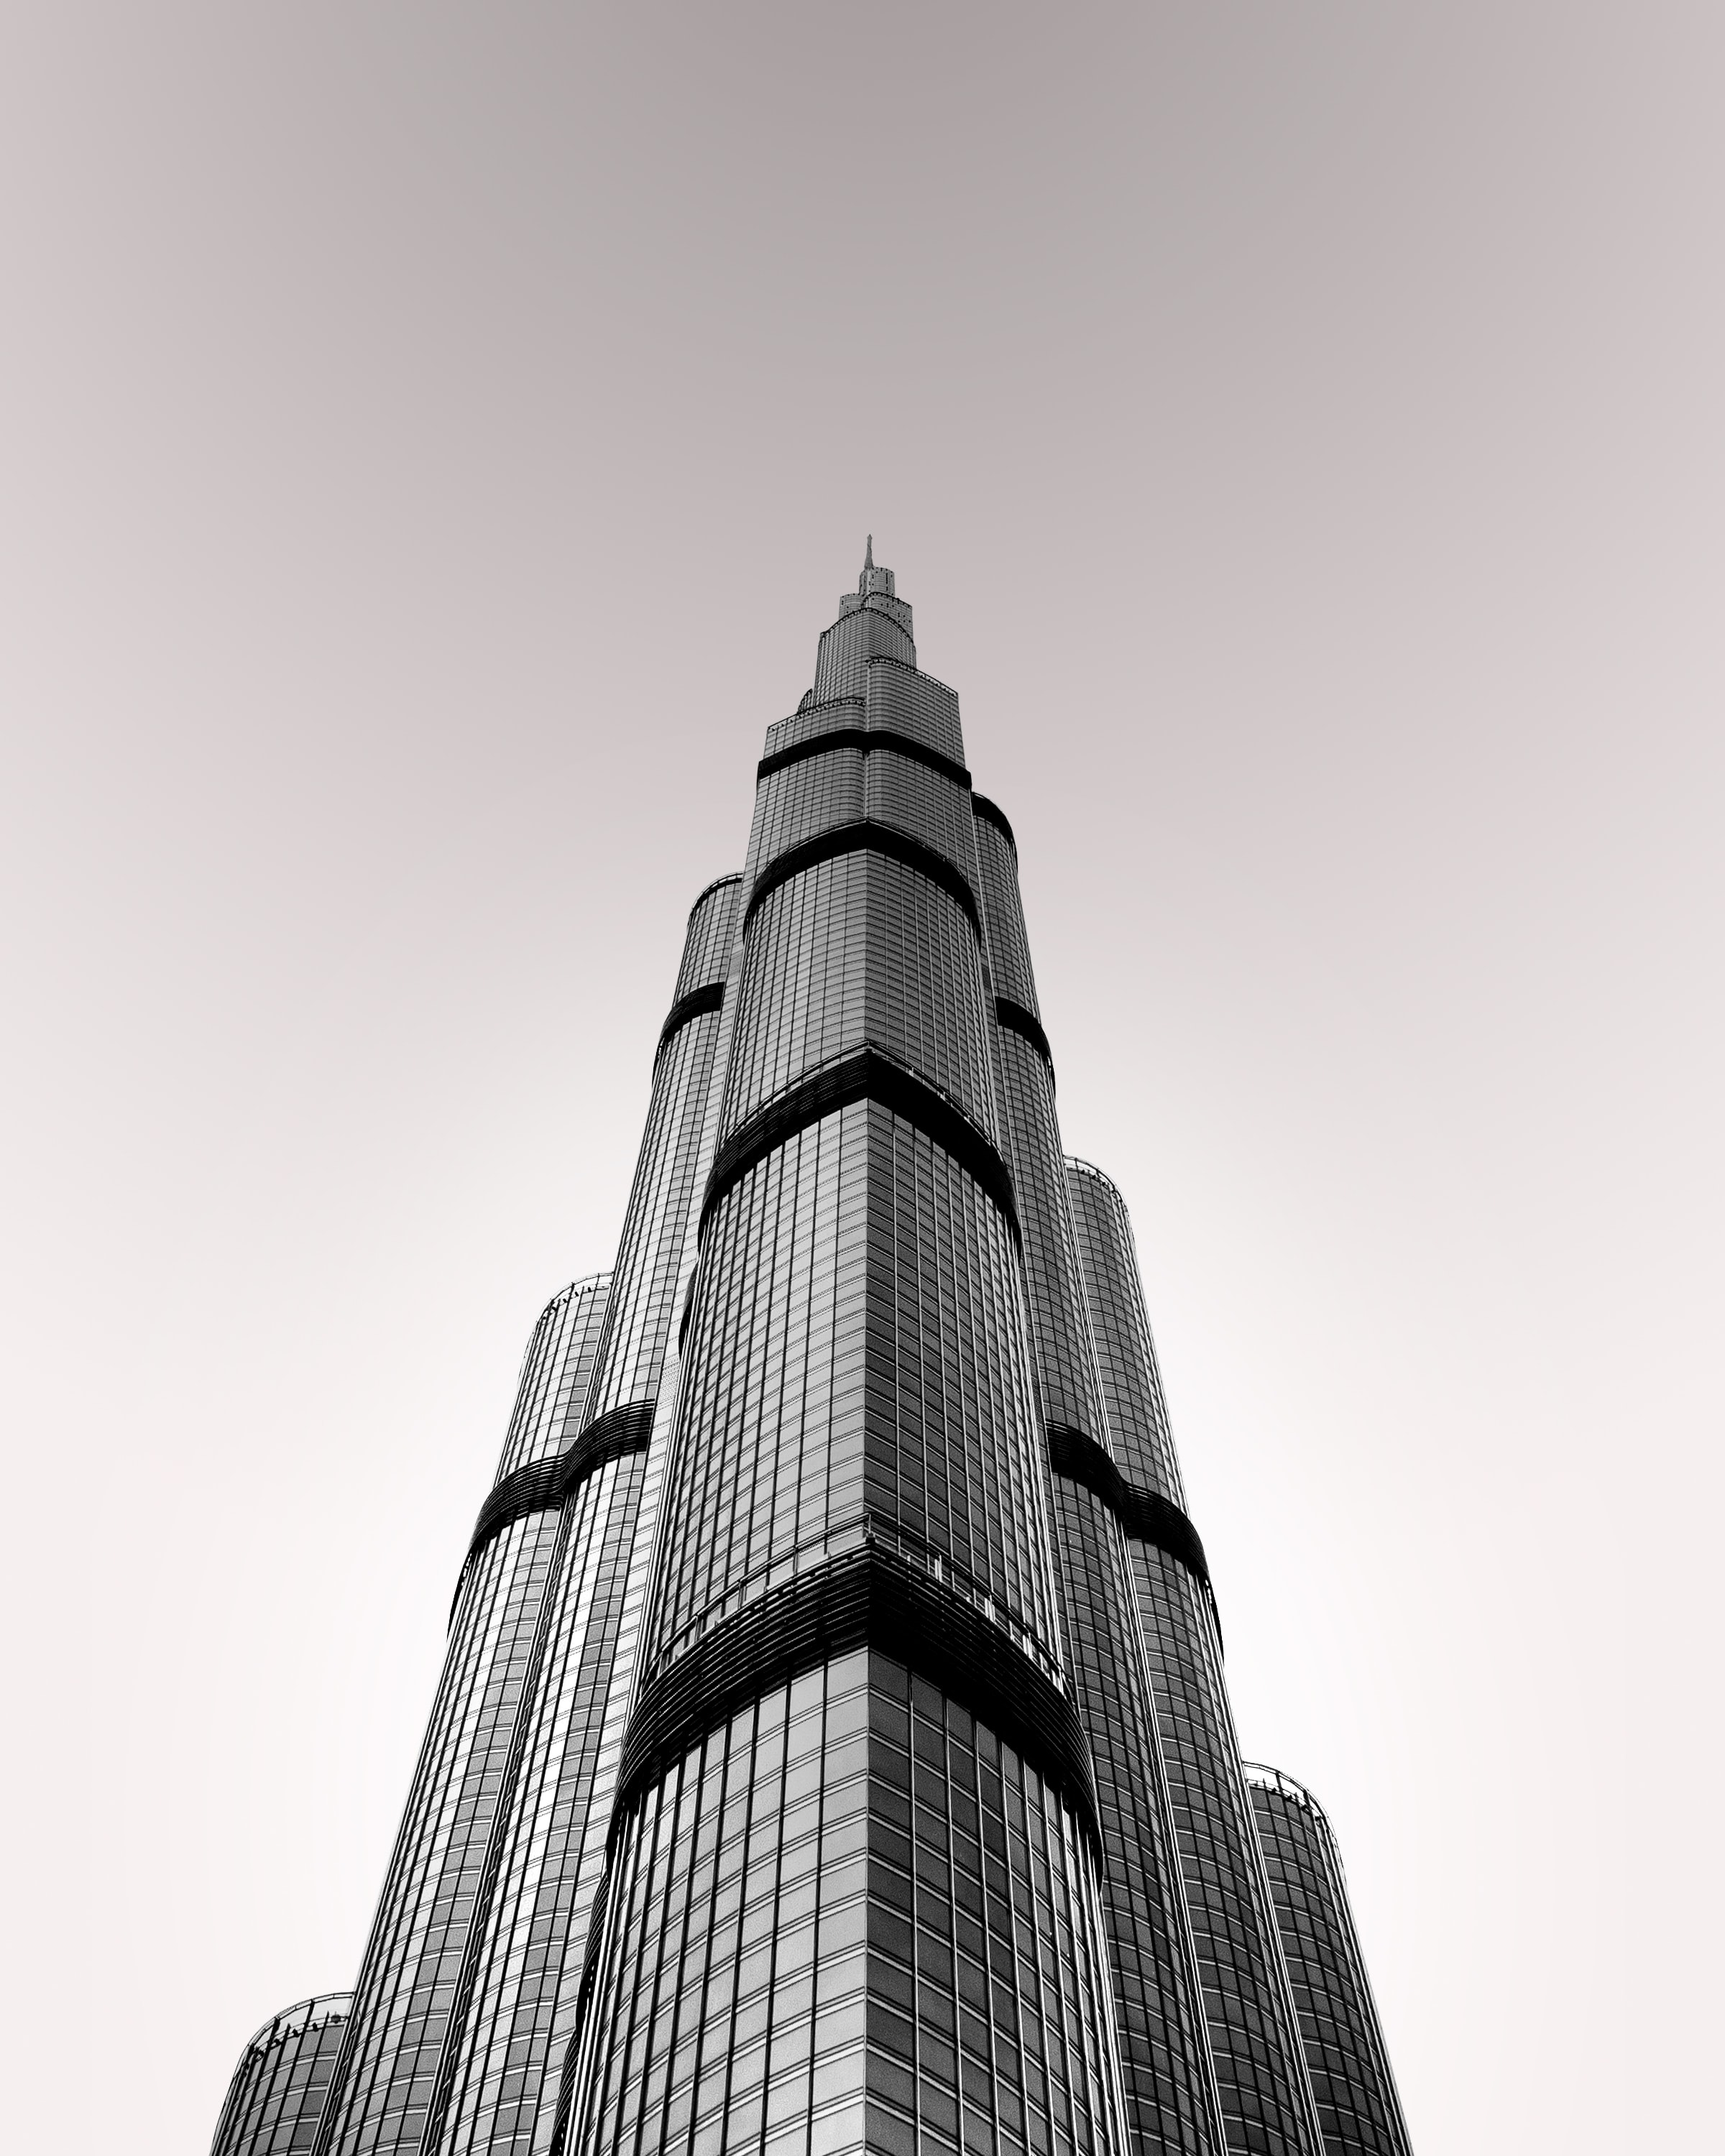 android architecture, skyscraper, tower, grey, building, minimalism